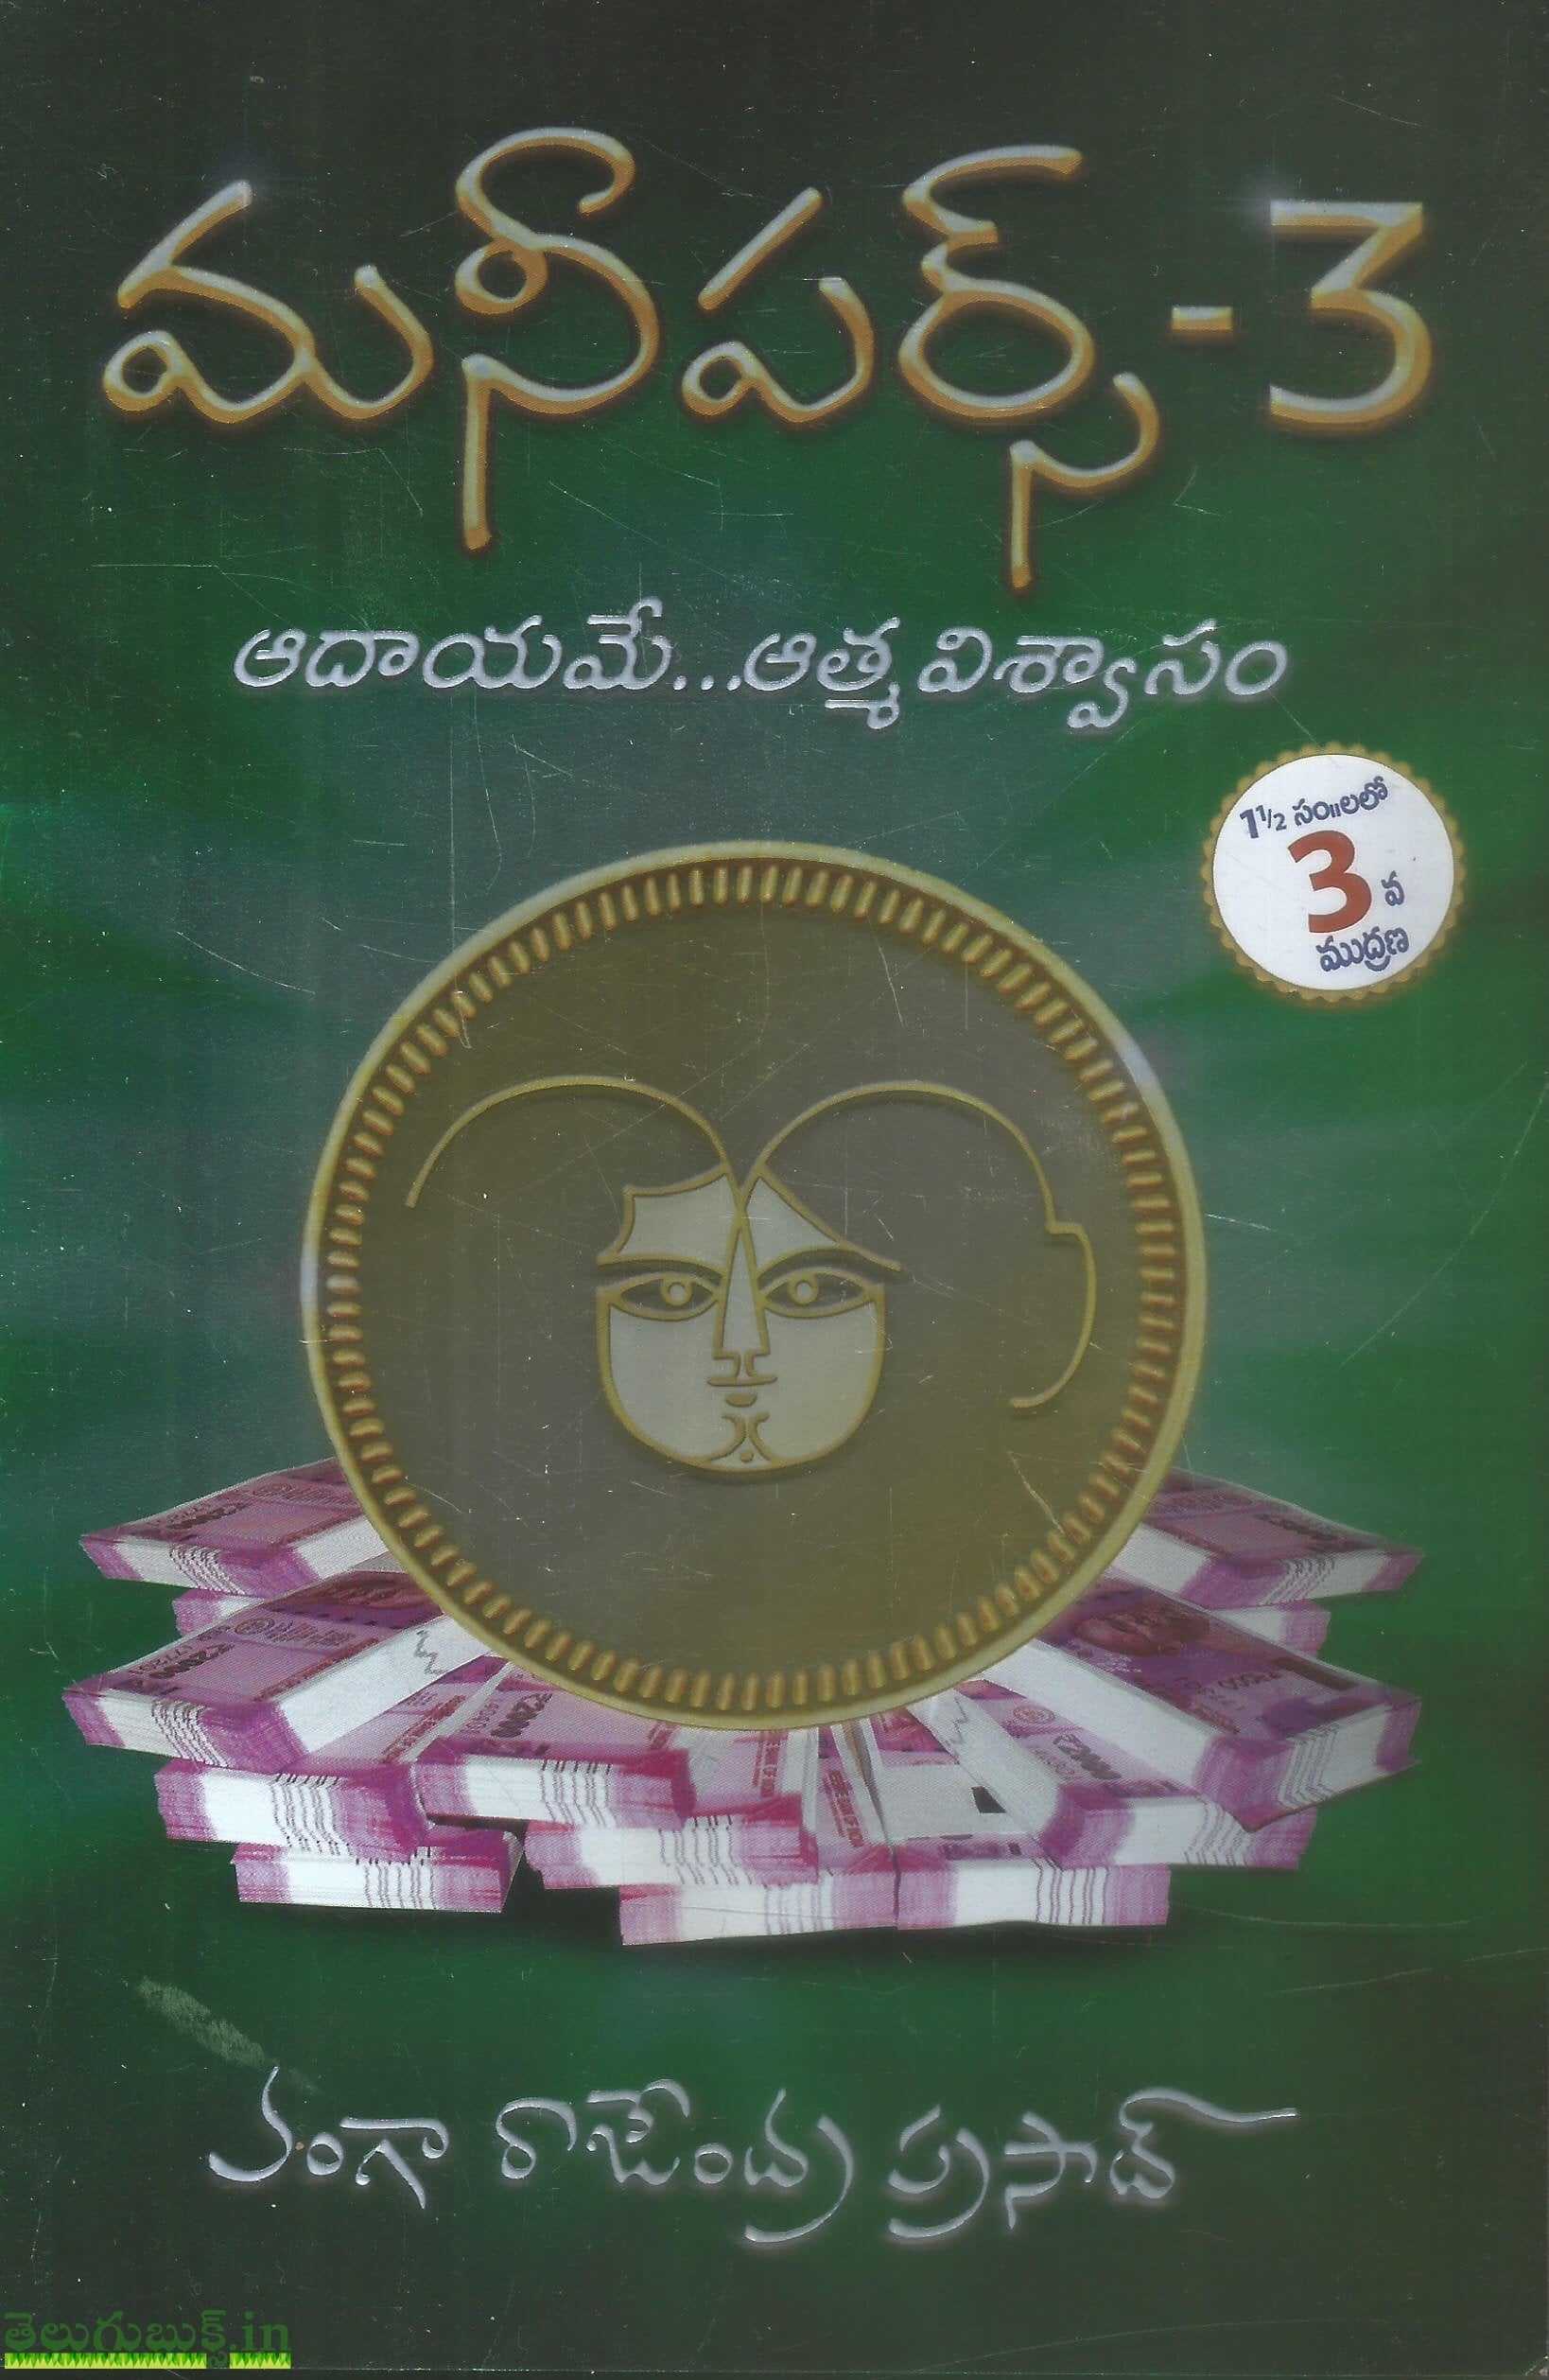 Vanga Rajendra Prasad - Money Purse 9th revised edition is in the market  now. Money Purse-2 book 5th edition is coming out soon | Facebook